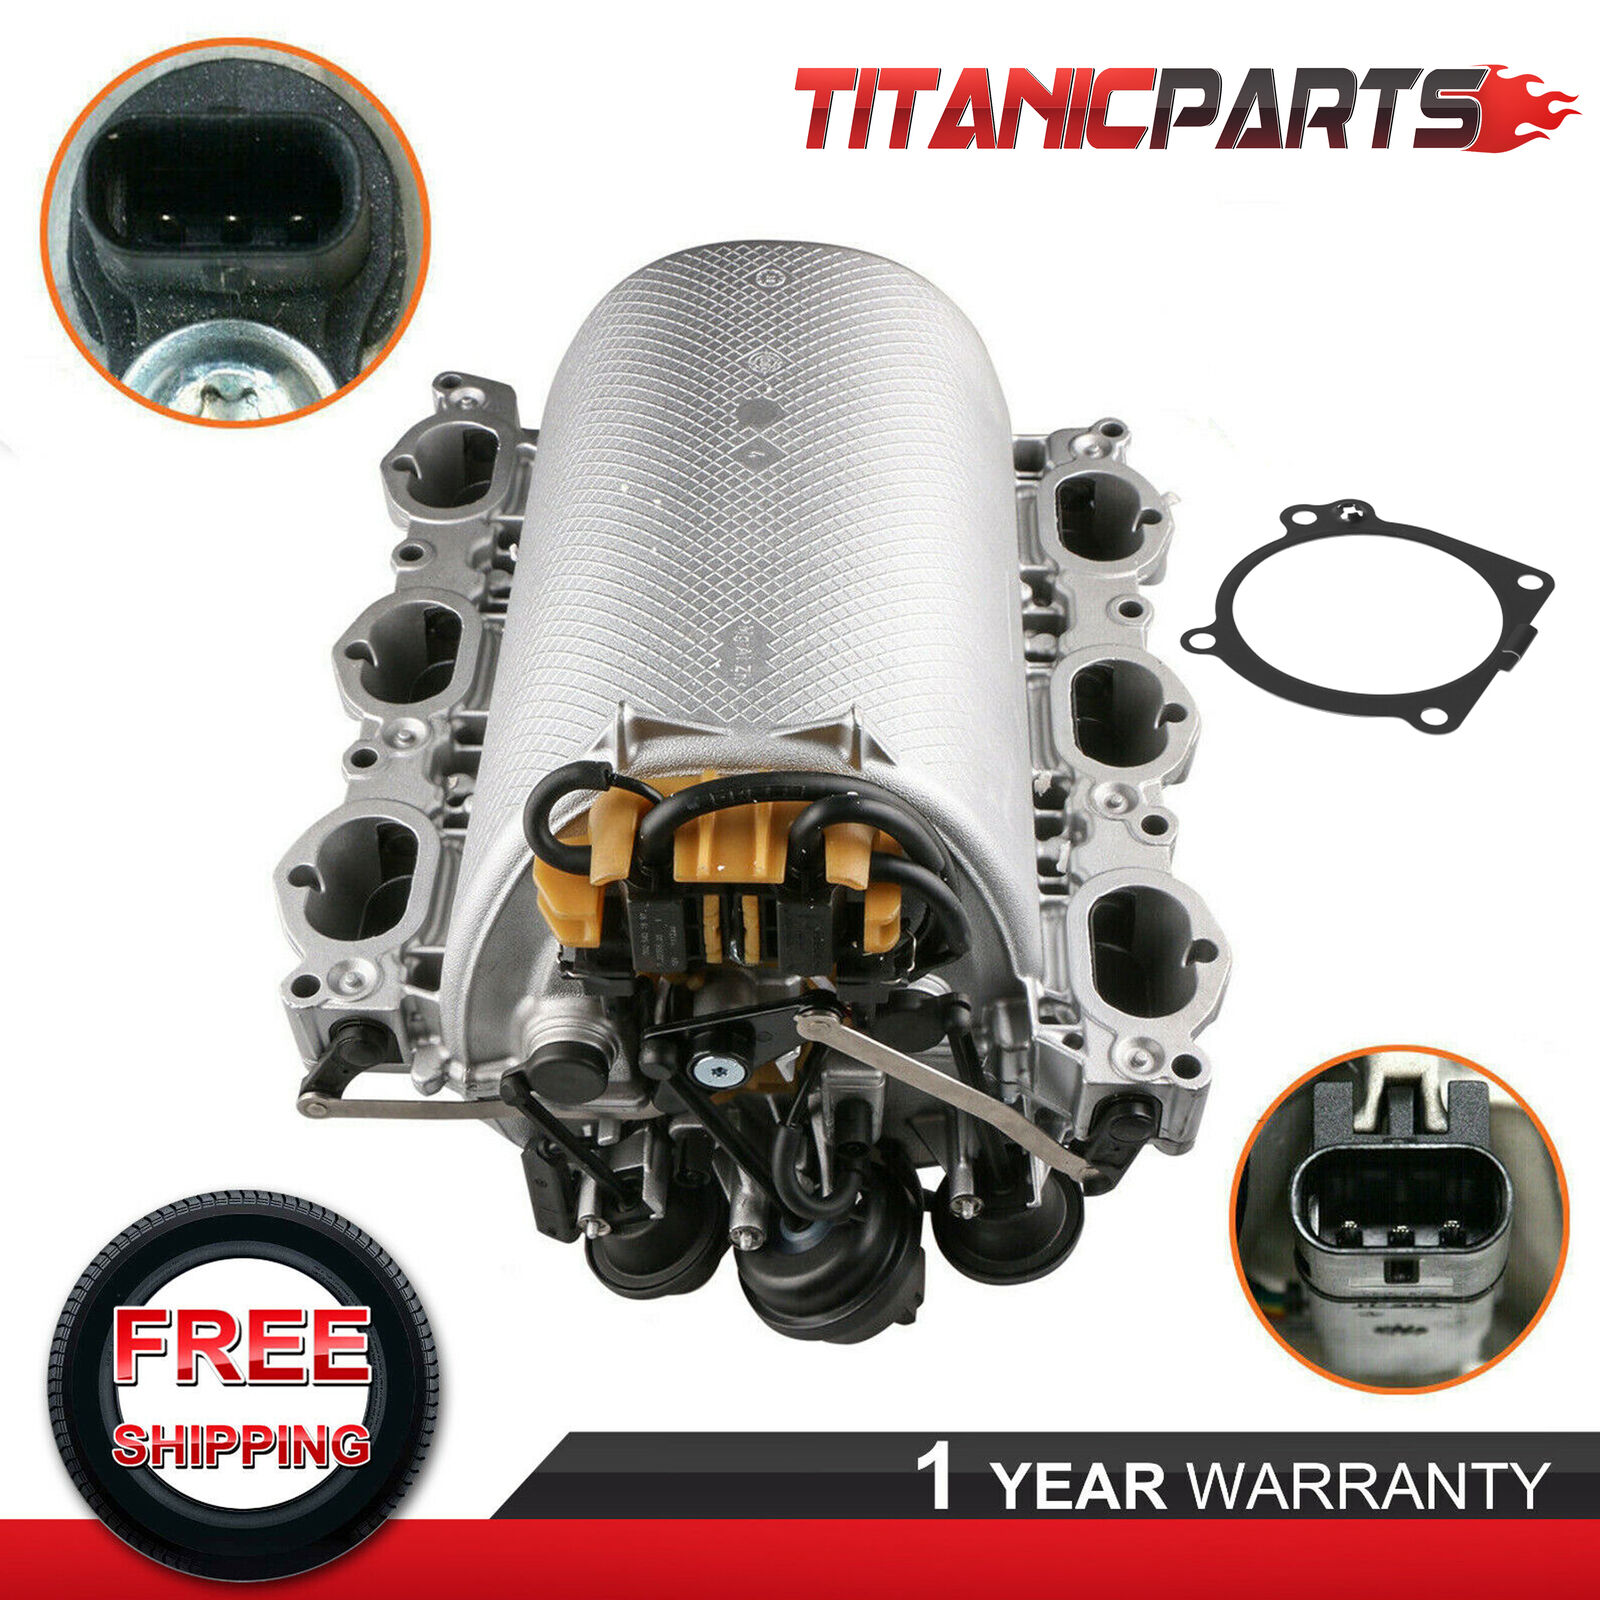 1PC Engine Intake Manifold Assembly For Mercedes-Benz C230 C300 CLK 350 E350